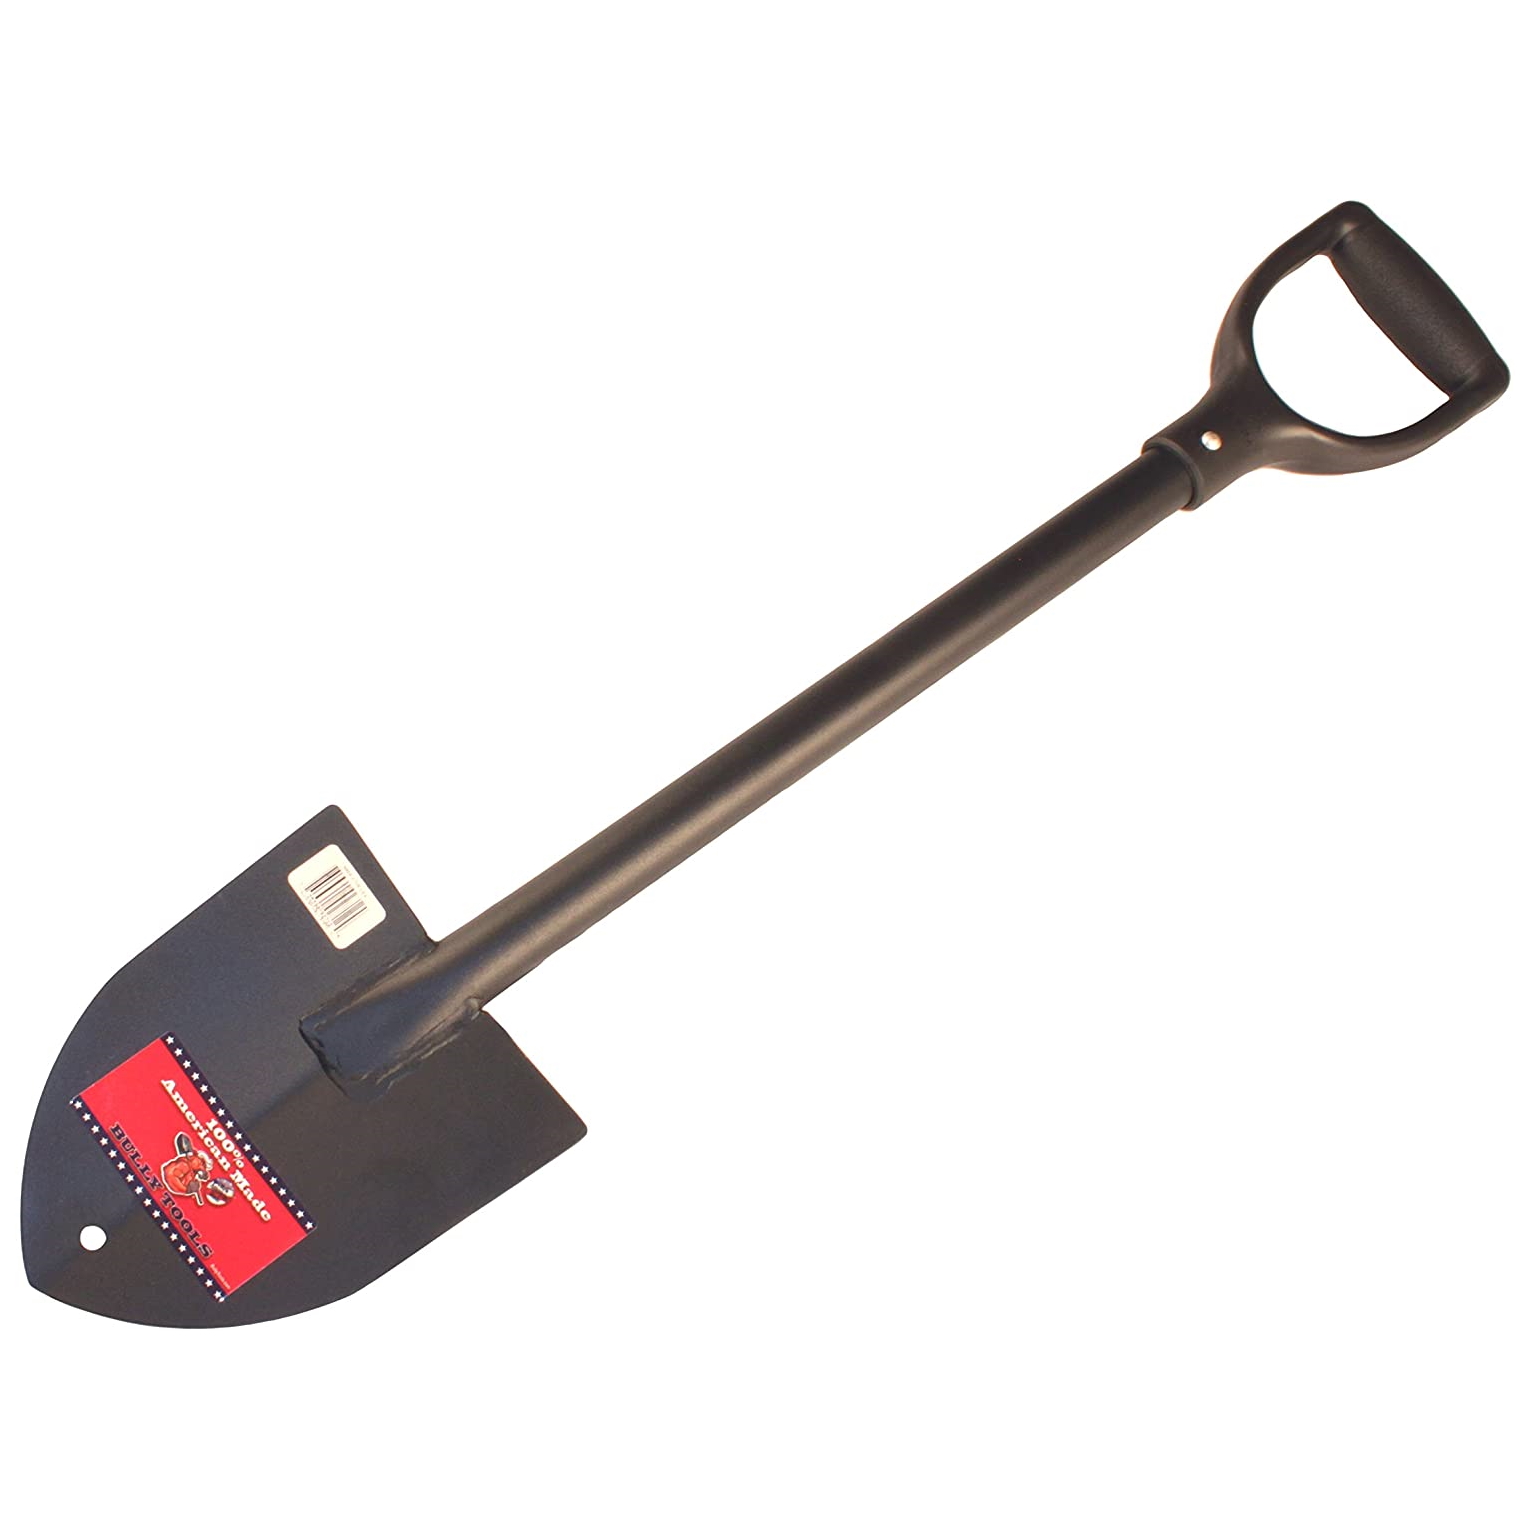 Bully Tools 92712 14-Gauge Round Point Trunk Shovel